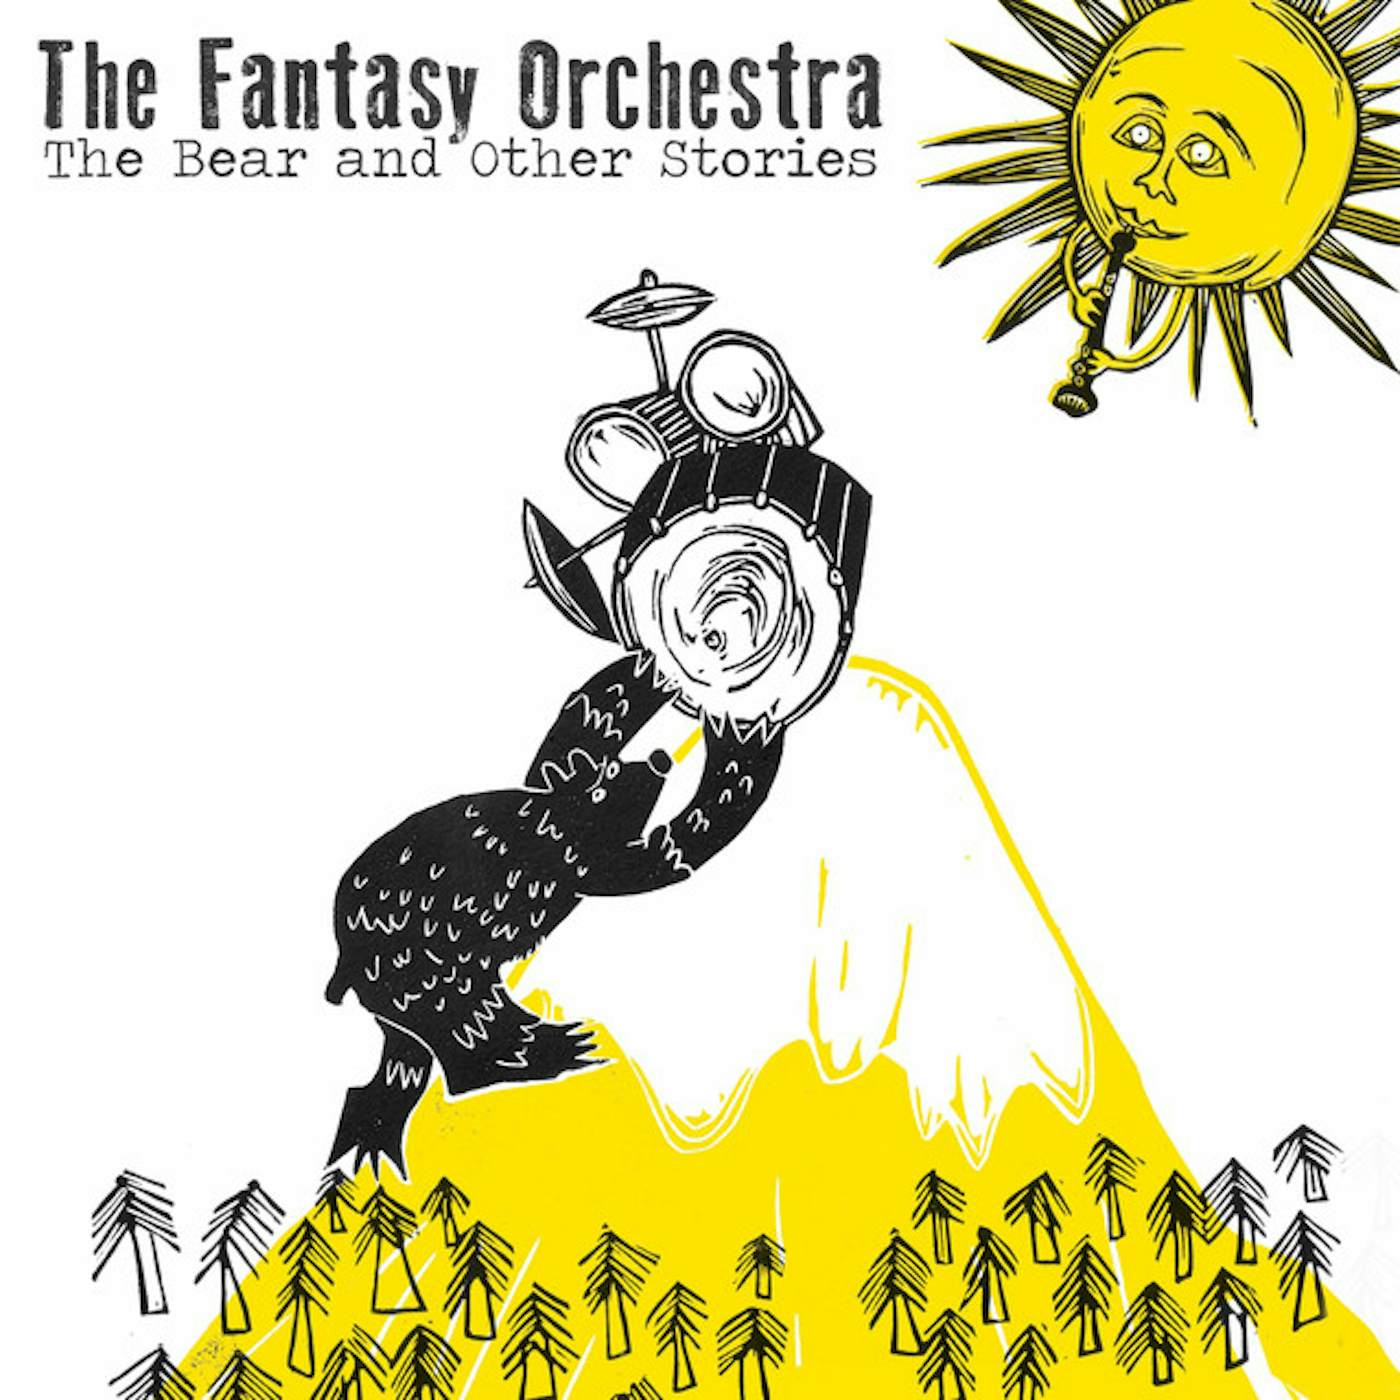 The Fantasy Orchestra BEAR & OTHER STORIES CD